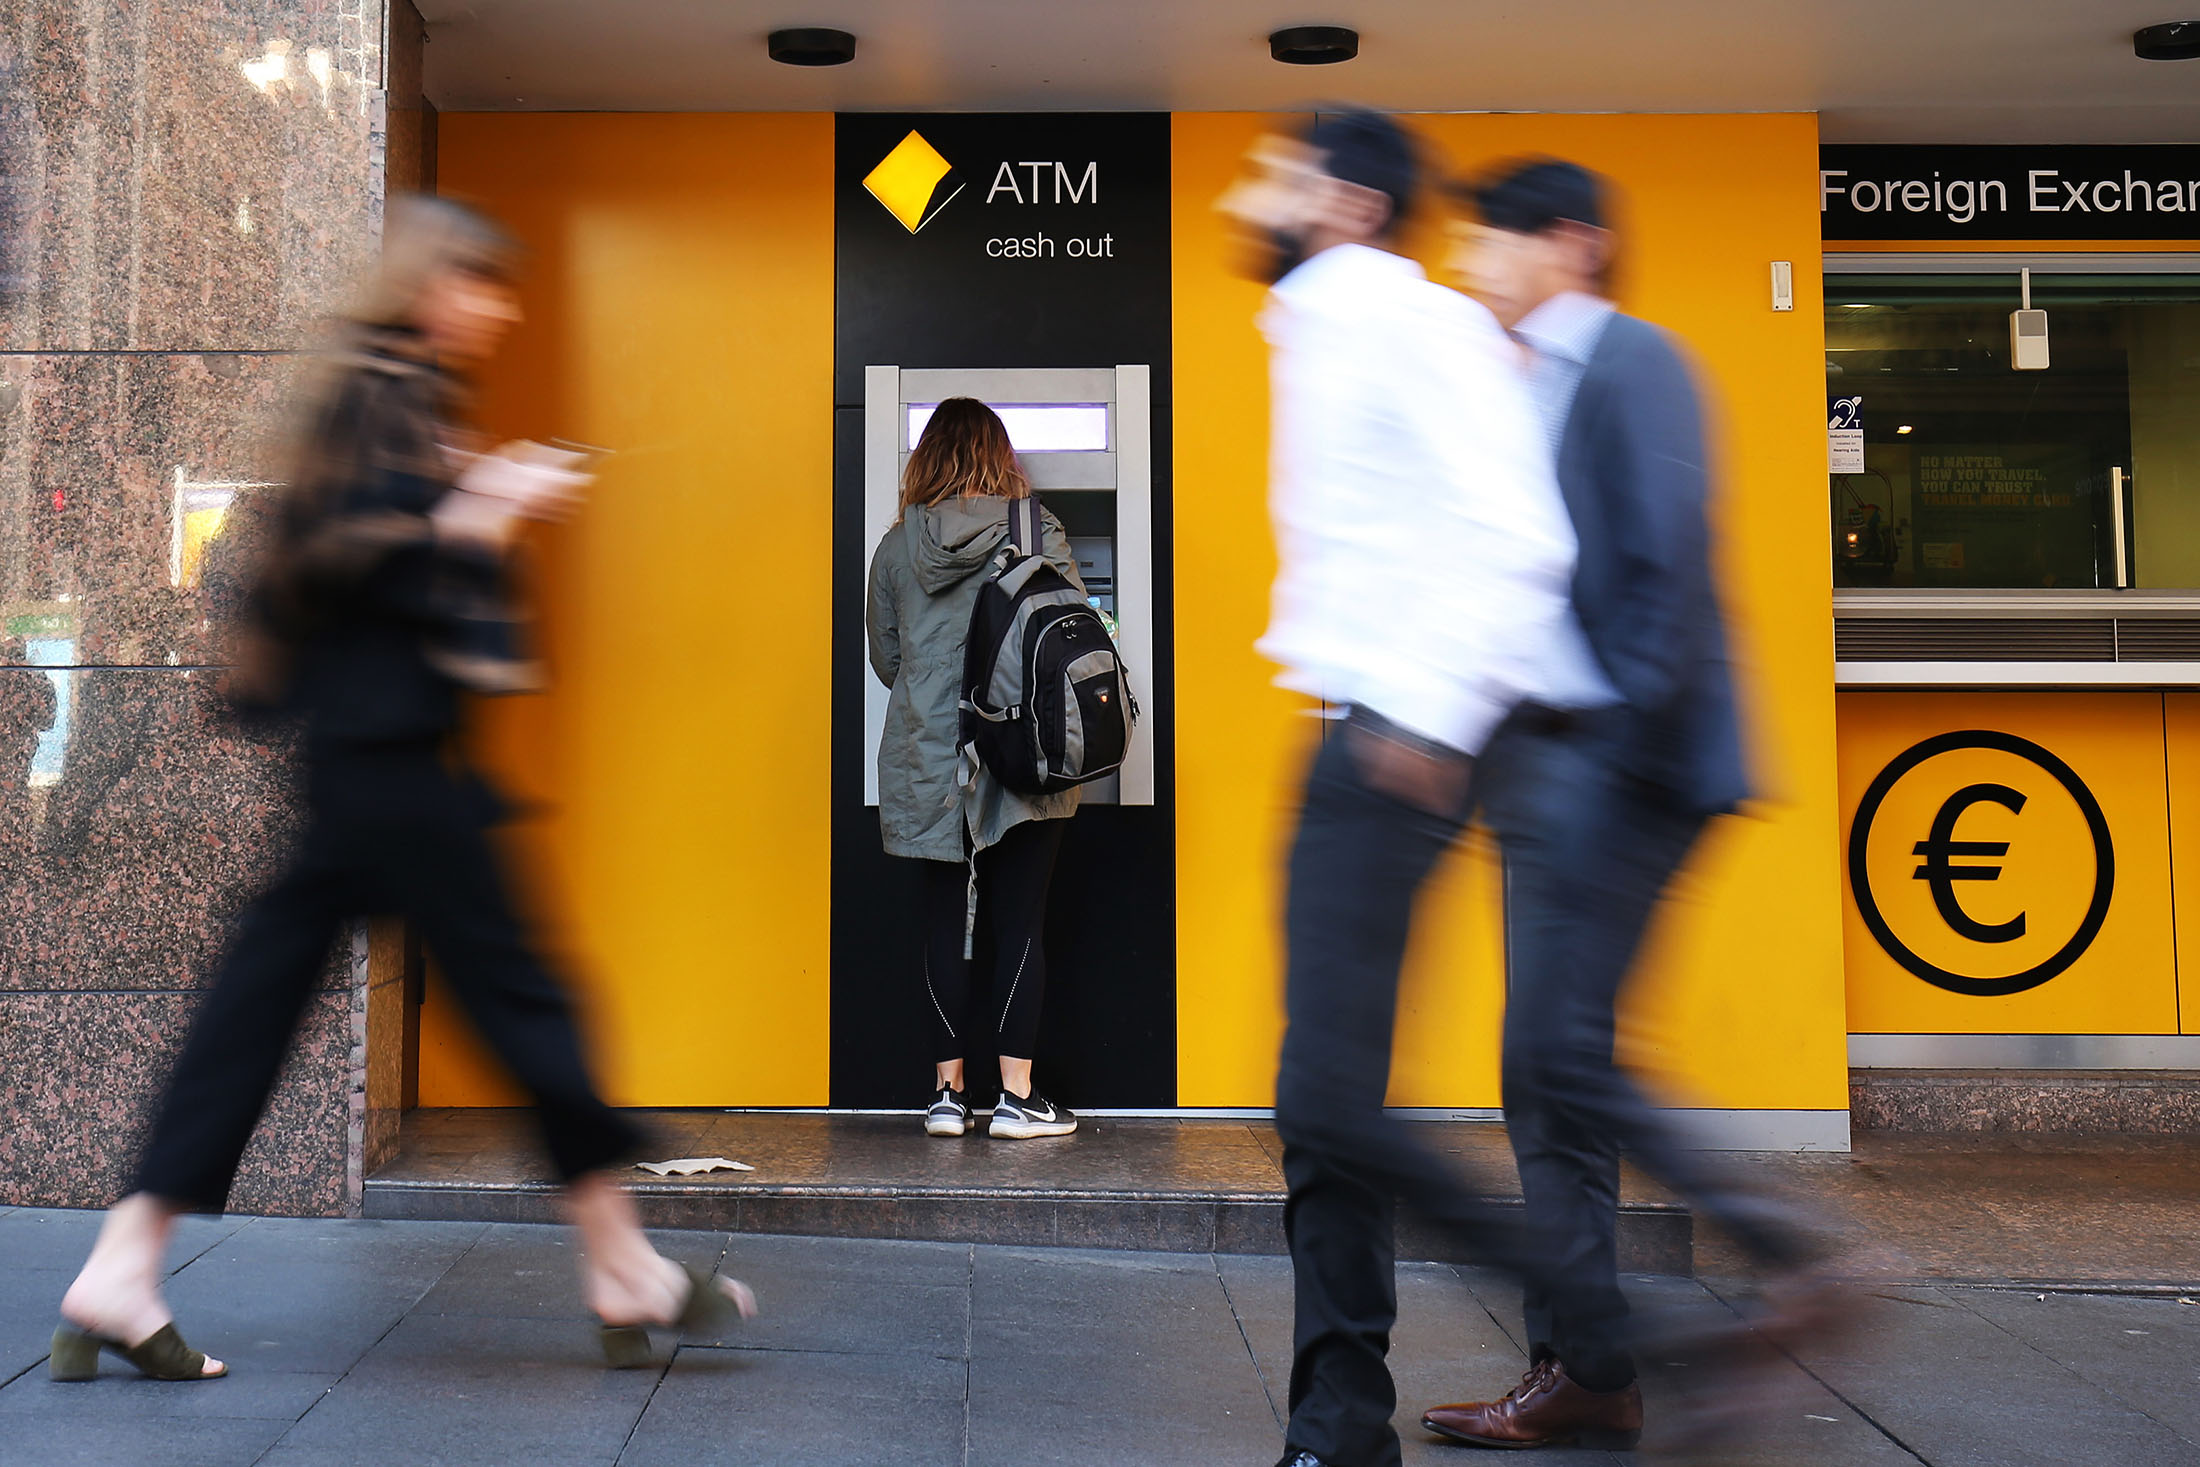 Australian Banks Drop ATM Charges - Bloomberg